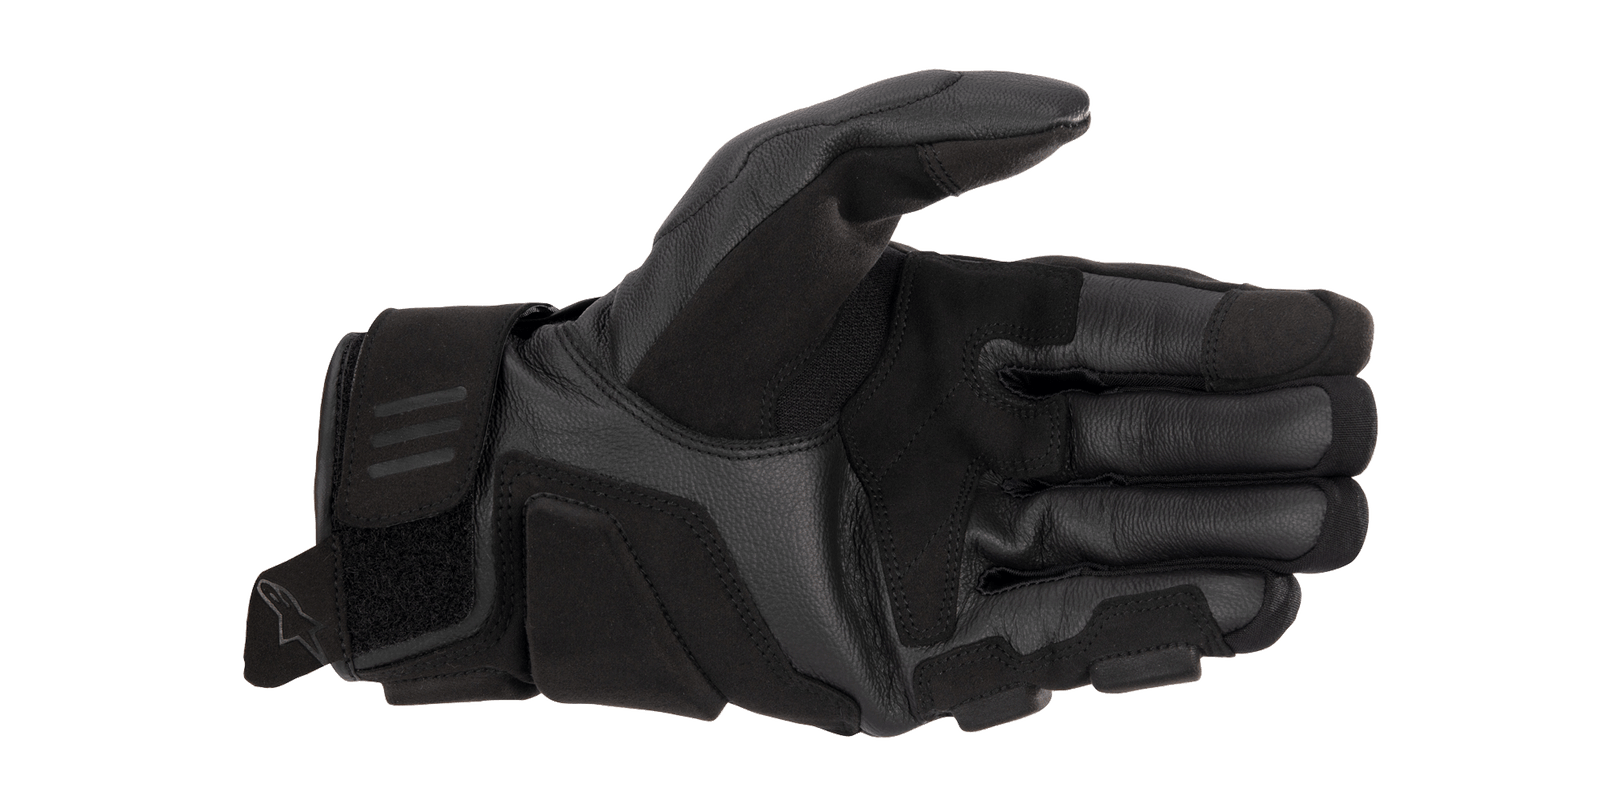 A black and white Alpinestars EU Phenom Leather Glove displaying the palm side, highlighting protective knuckle padding, perforated leather for breathability, and a Velcro strap at the wrist for a secure fit. The Alpinestars logo is visible on the side of these sport performance gloves.